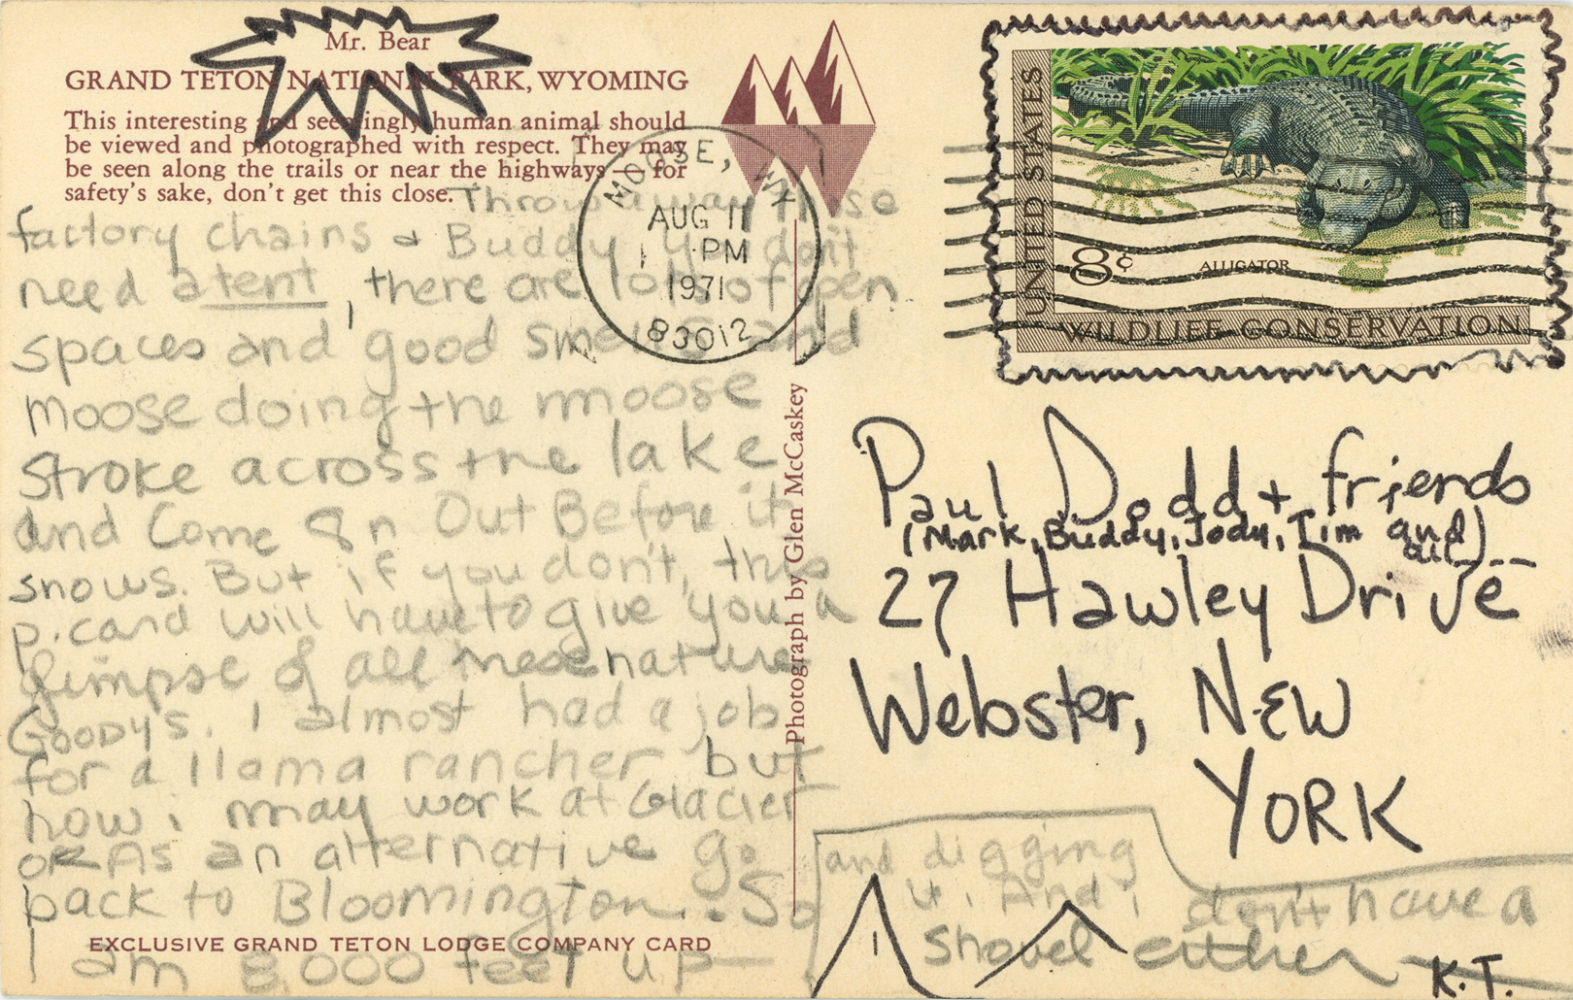 Postcard from Kim to my parents' house 1971